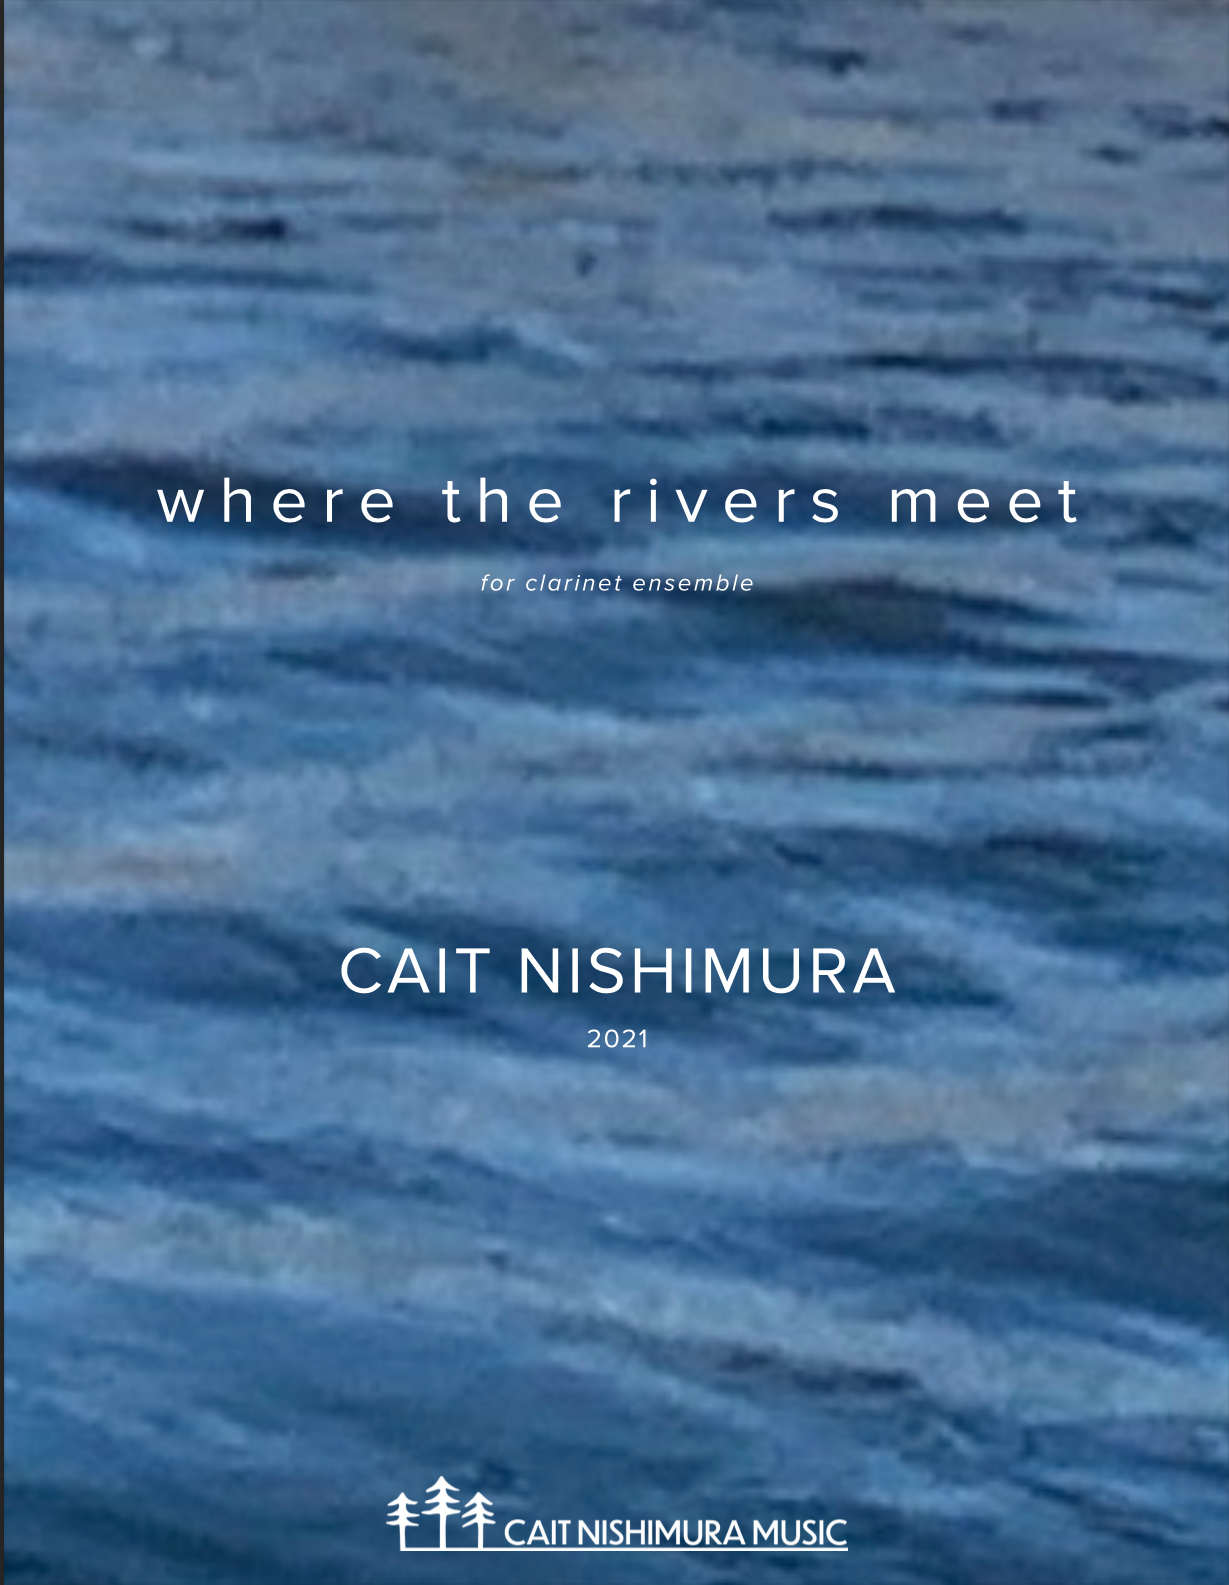 Where The Rivers Meet (Clarinet Version) by Cait Nishimura